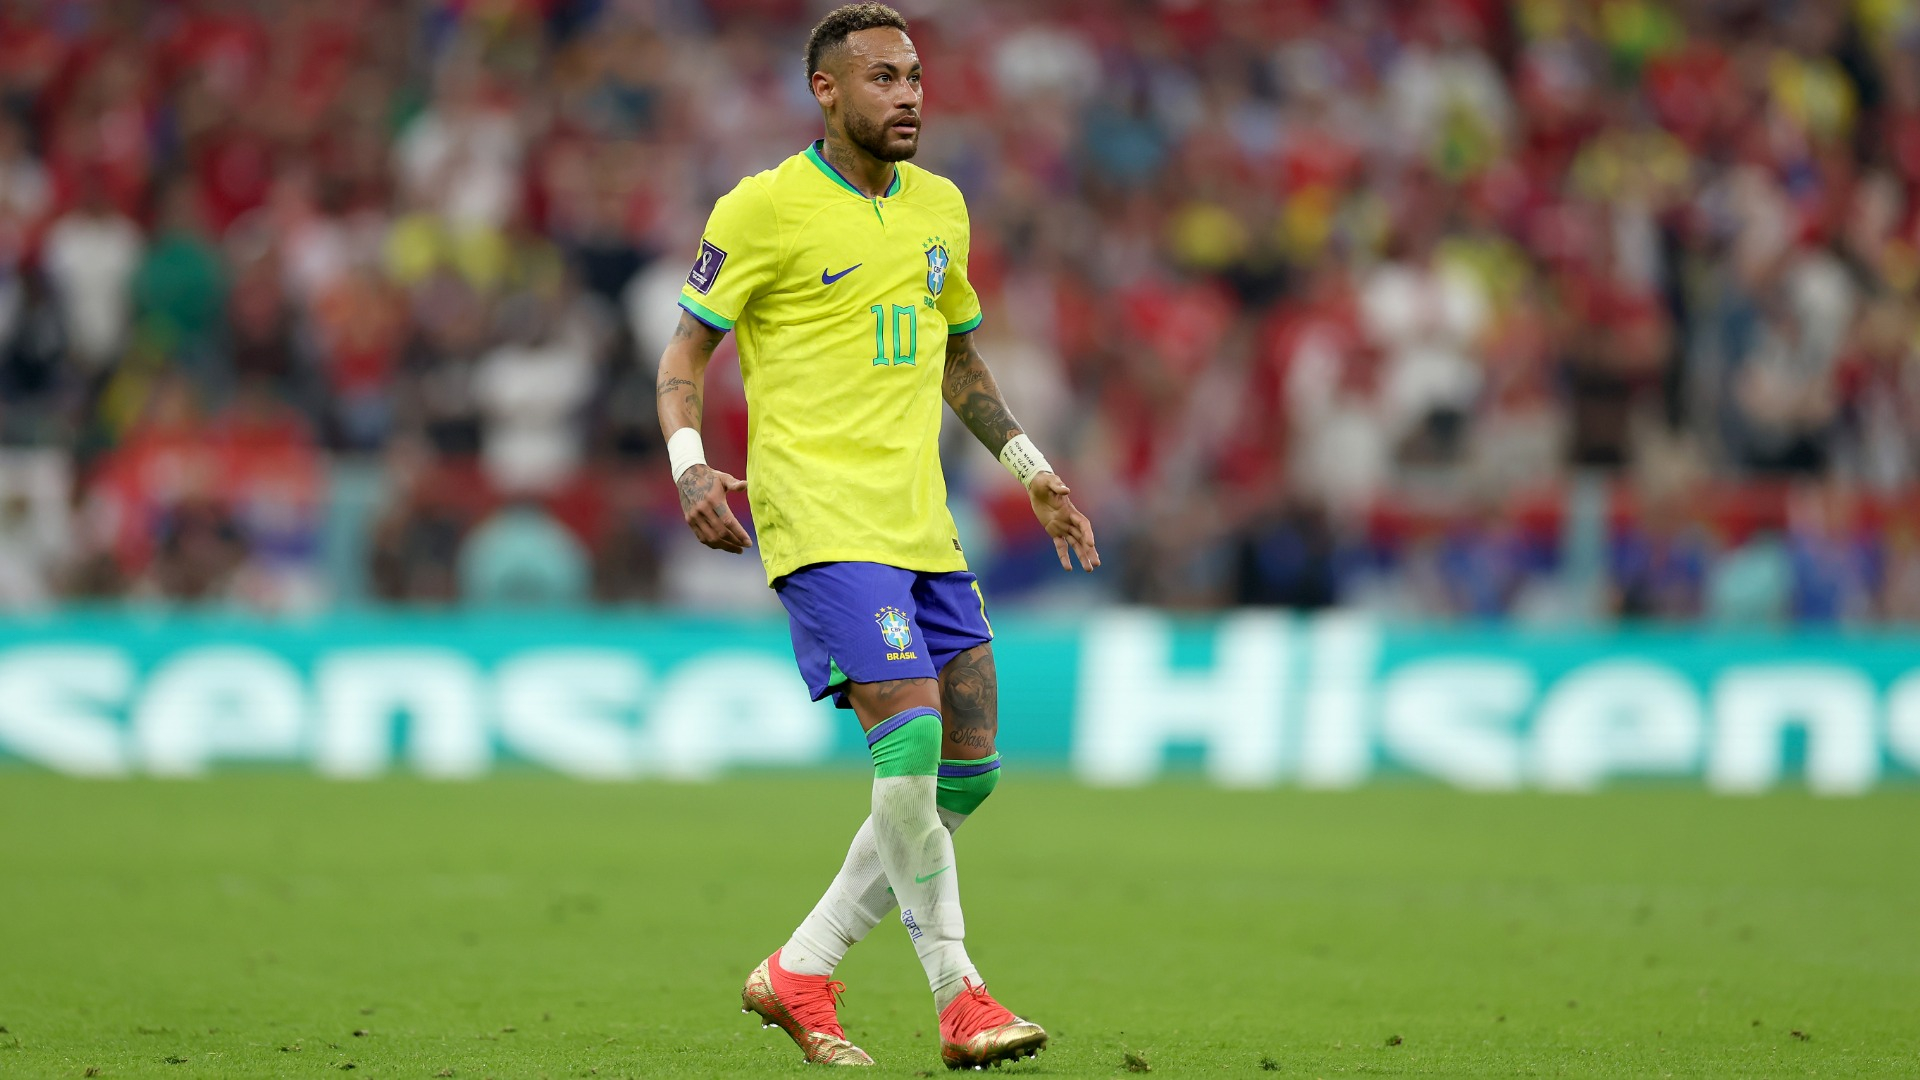 Breaking down Brazil's World Cup squad: From Neymar to Thiago